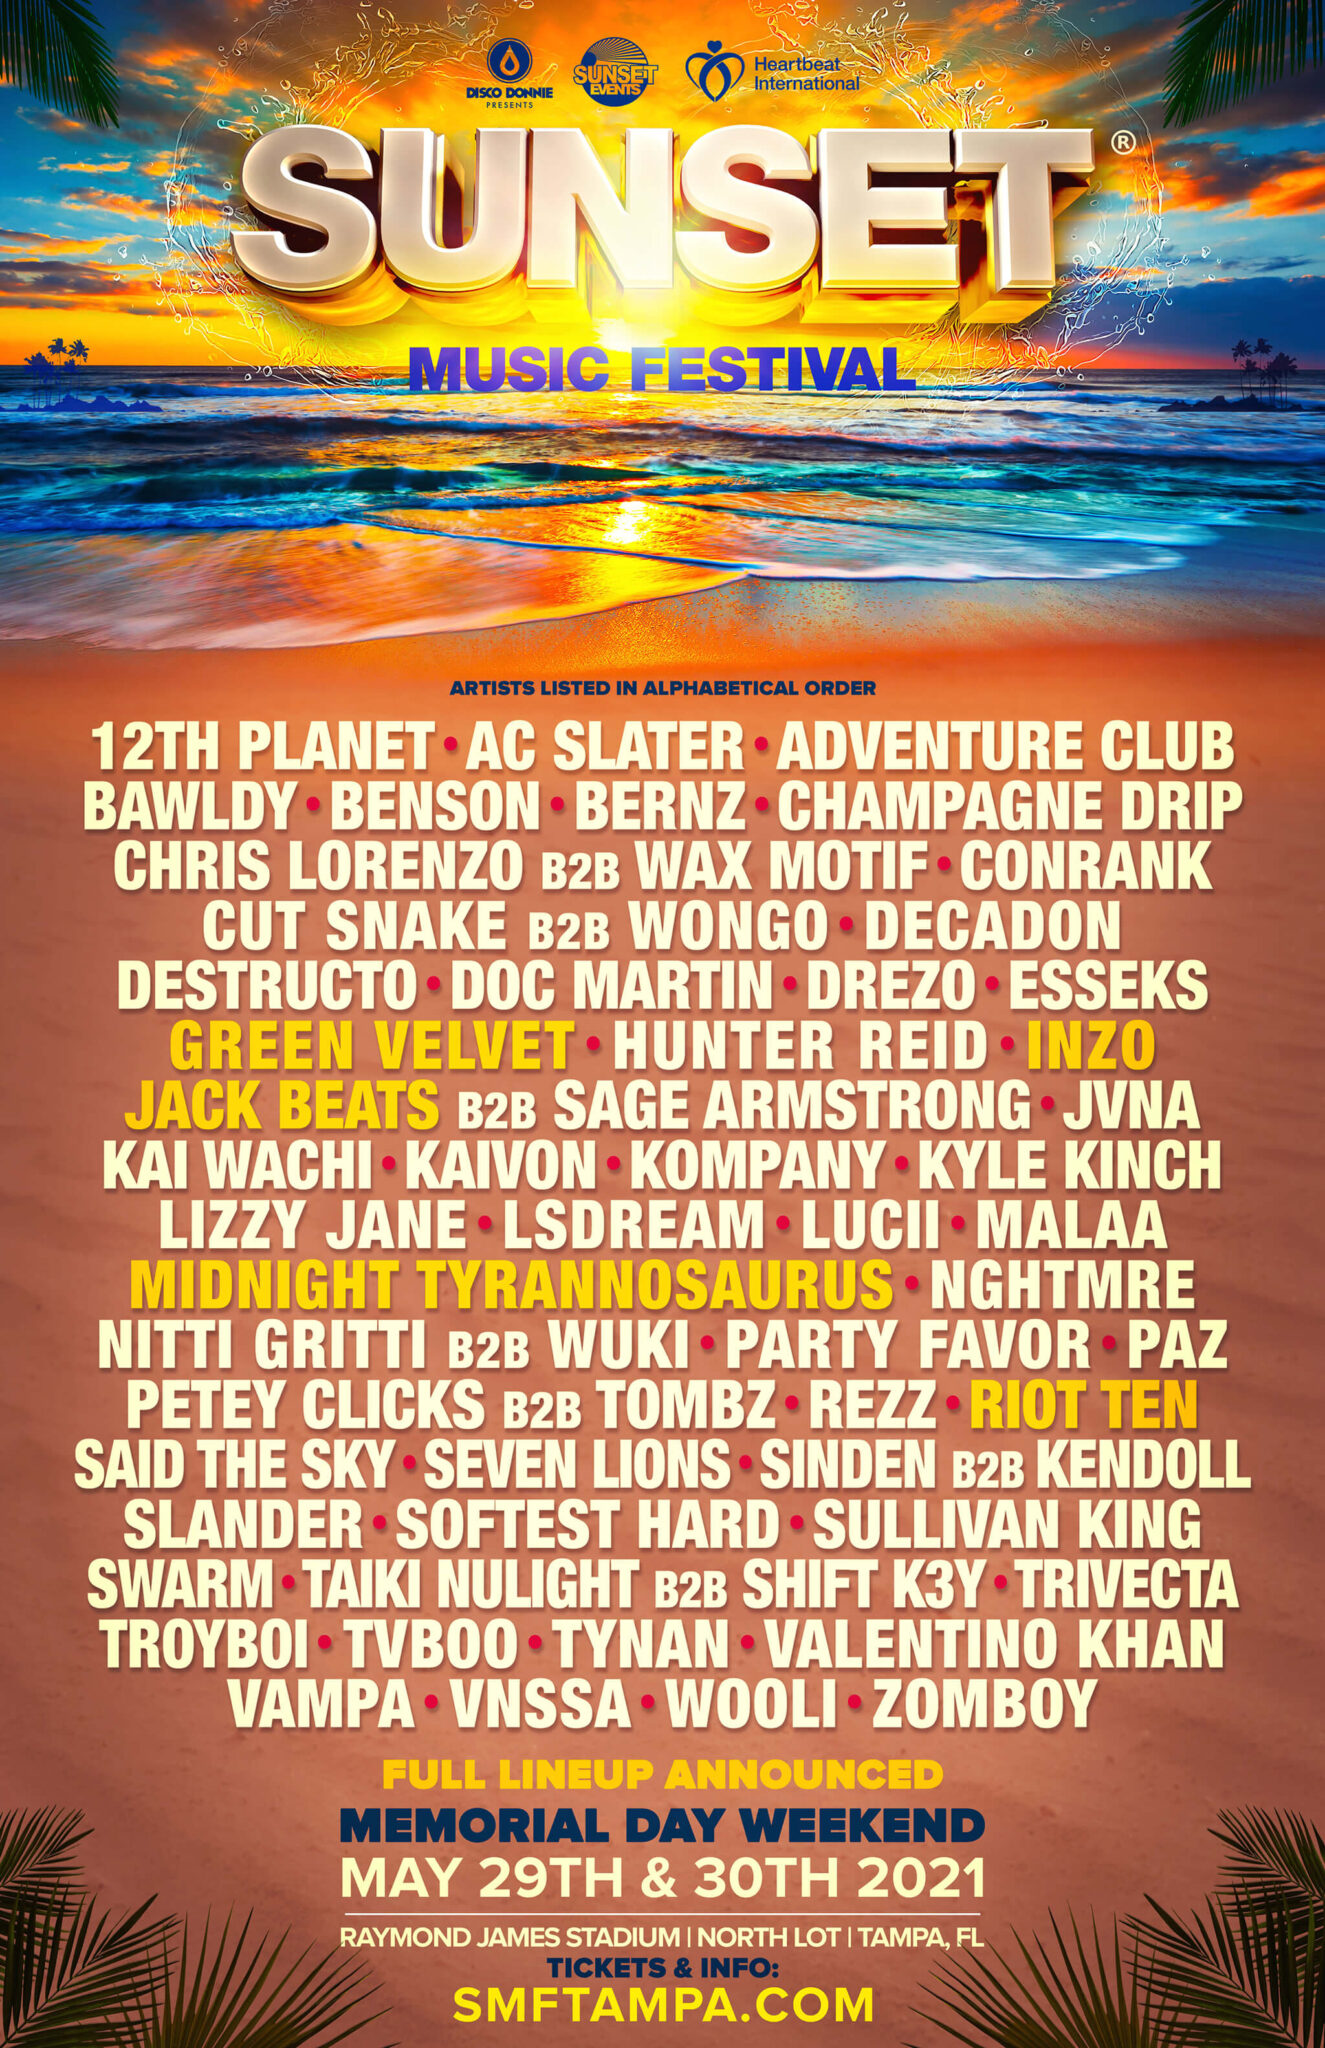 Festival Sunset Music Festival Tampa, Fla. tickets and lineup on May